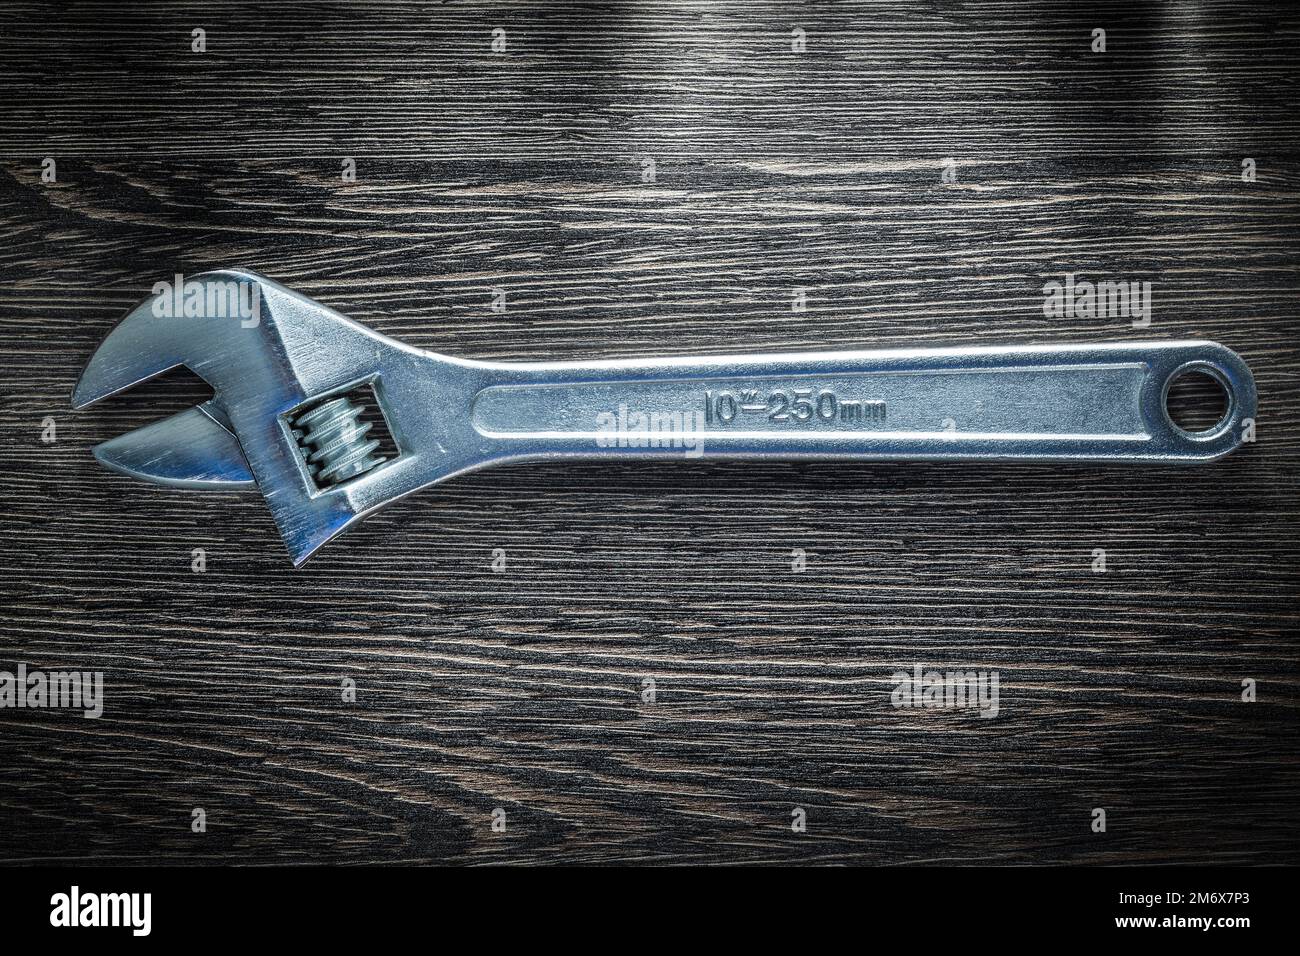 Adjustable wrench on wooden board. Stock Photo